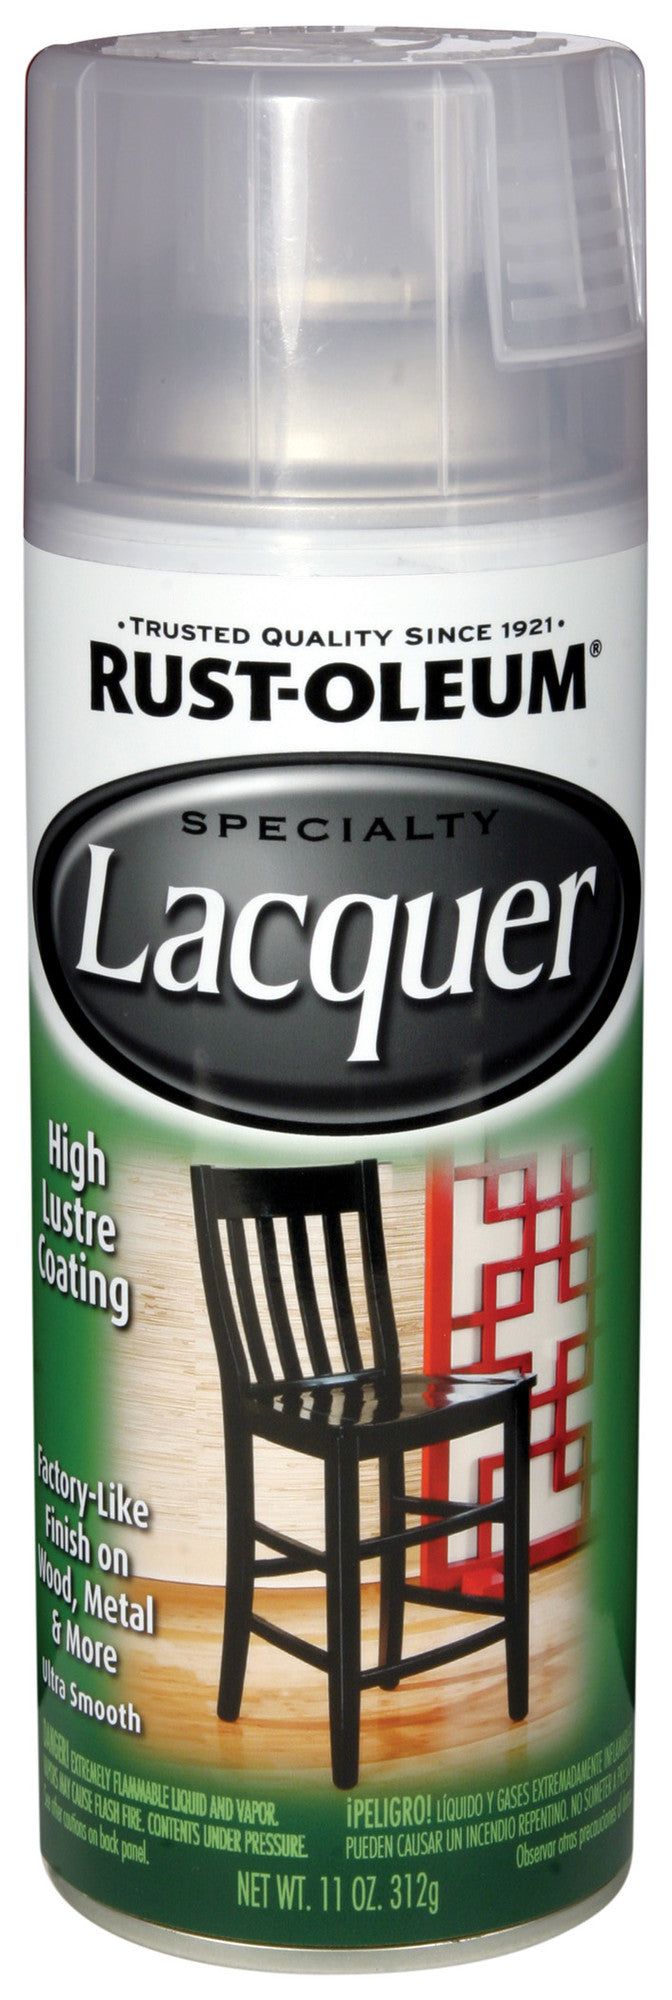 Buy rust-oleum 1906830 lacquer spray, 11-ounce, gloss clear - Online store for stain, spray brushing lacquers in USA, on sale, low price, discount deals, coupon code